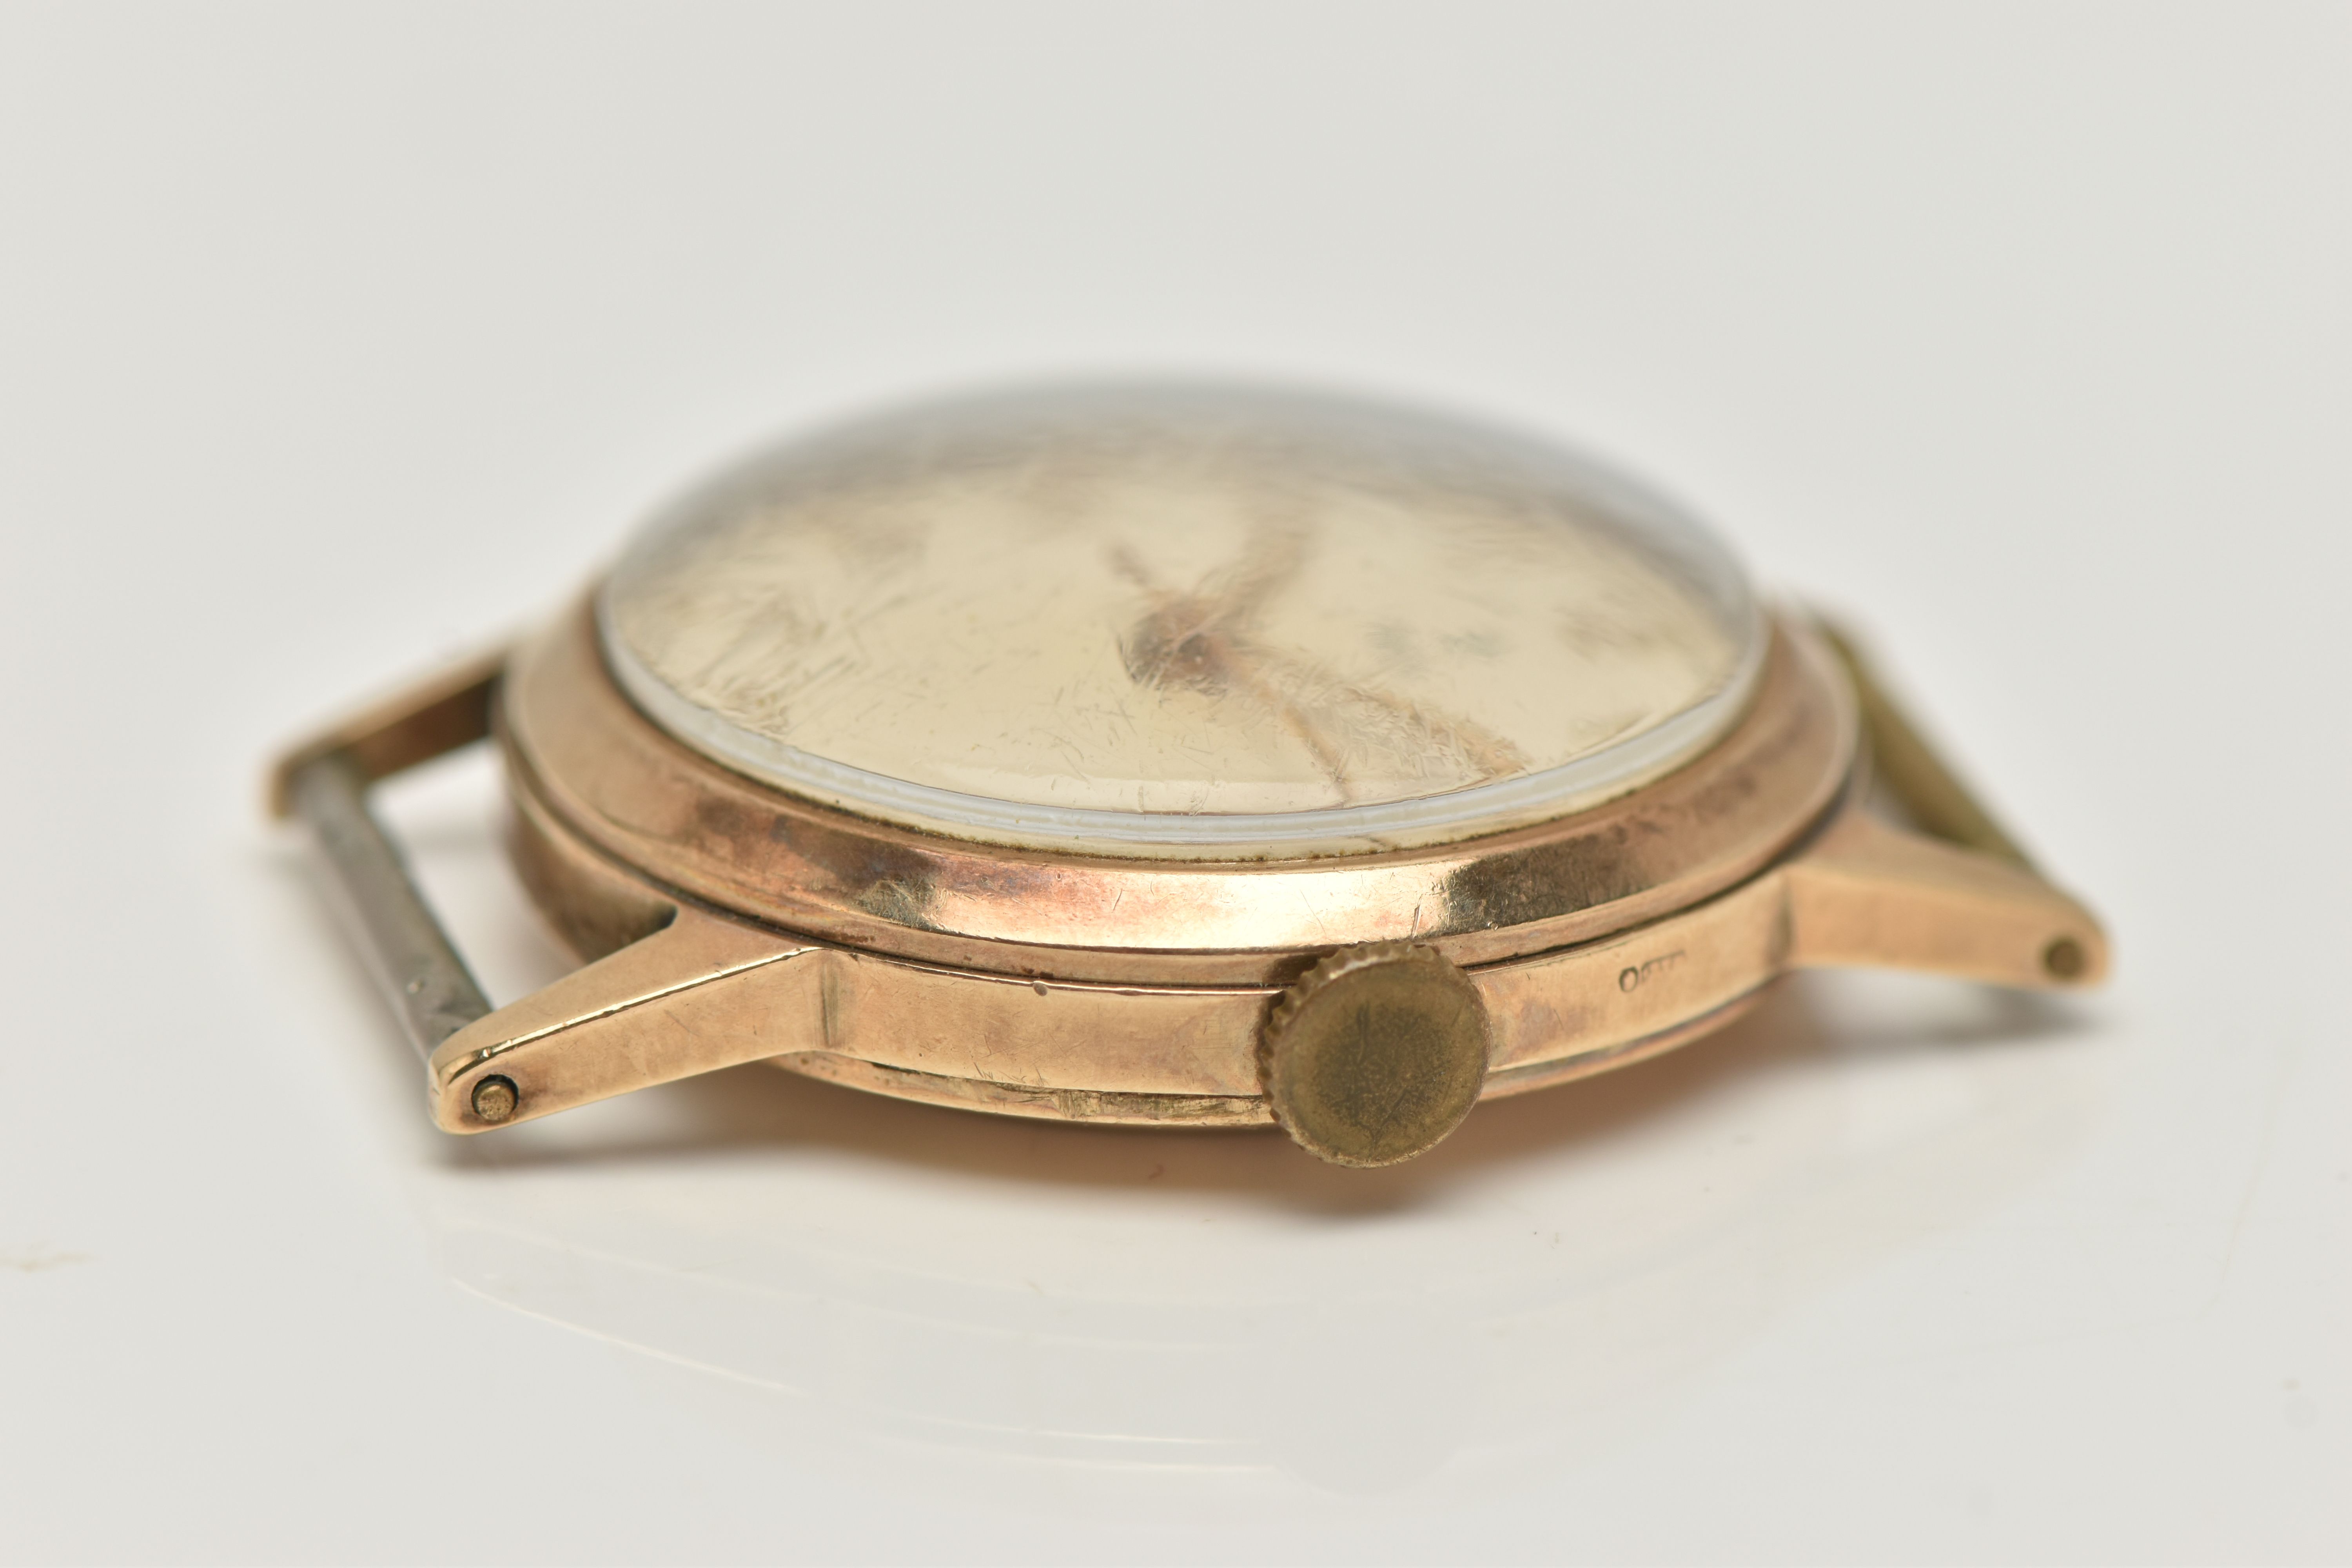 A GENTS 9CT GOLD 'TUDOR' WATCH, manual wind, round cream dial signed 'Tudor', Arabic numerals, - Image 5 of 5